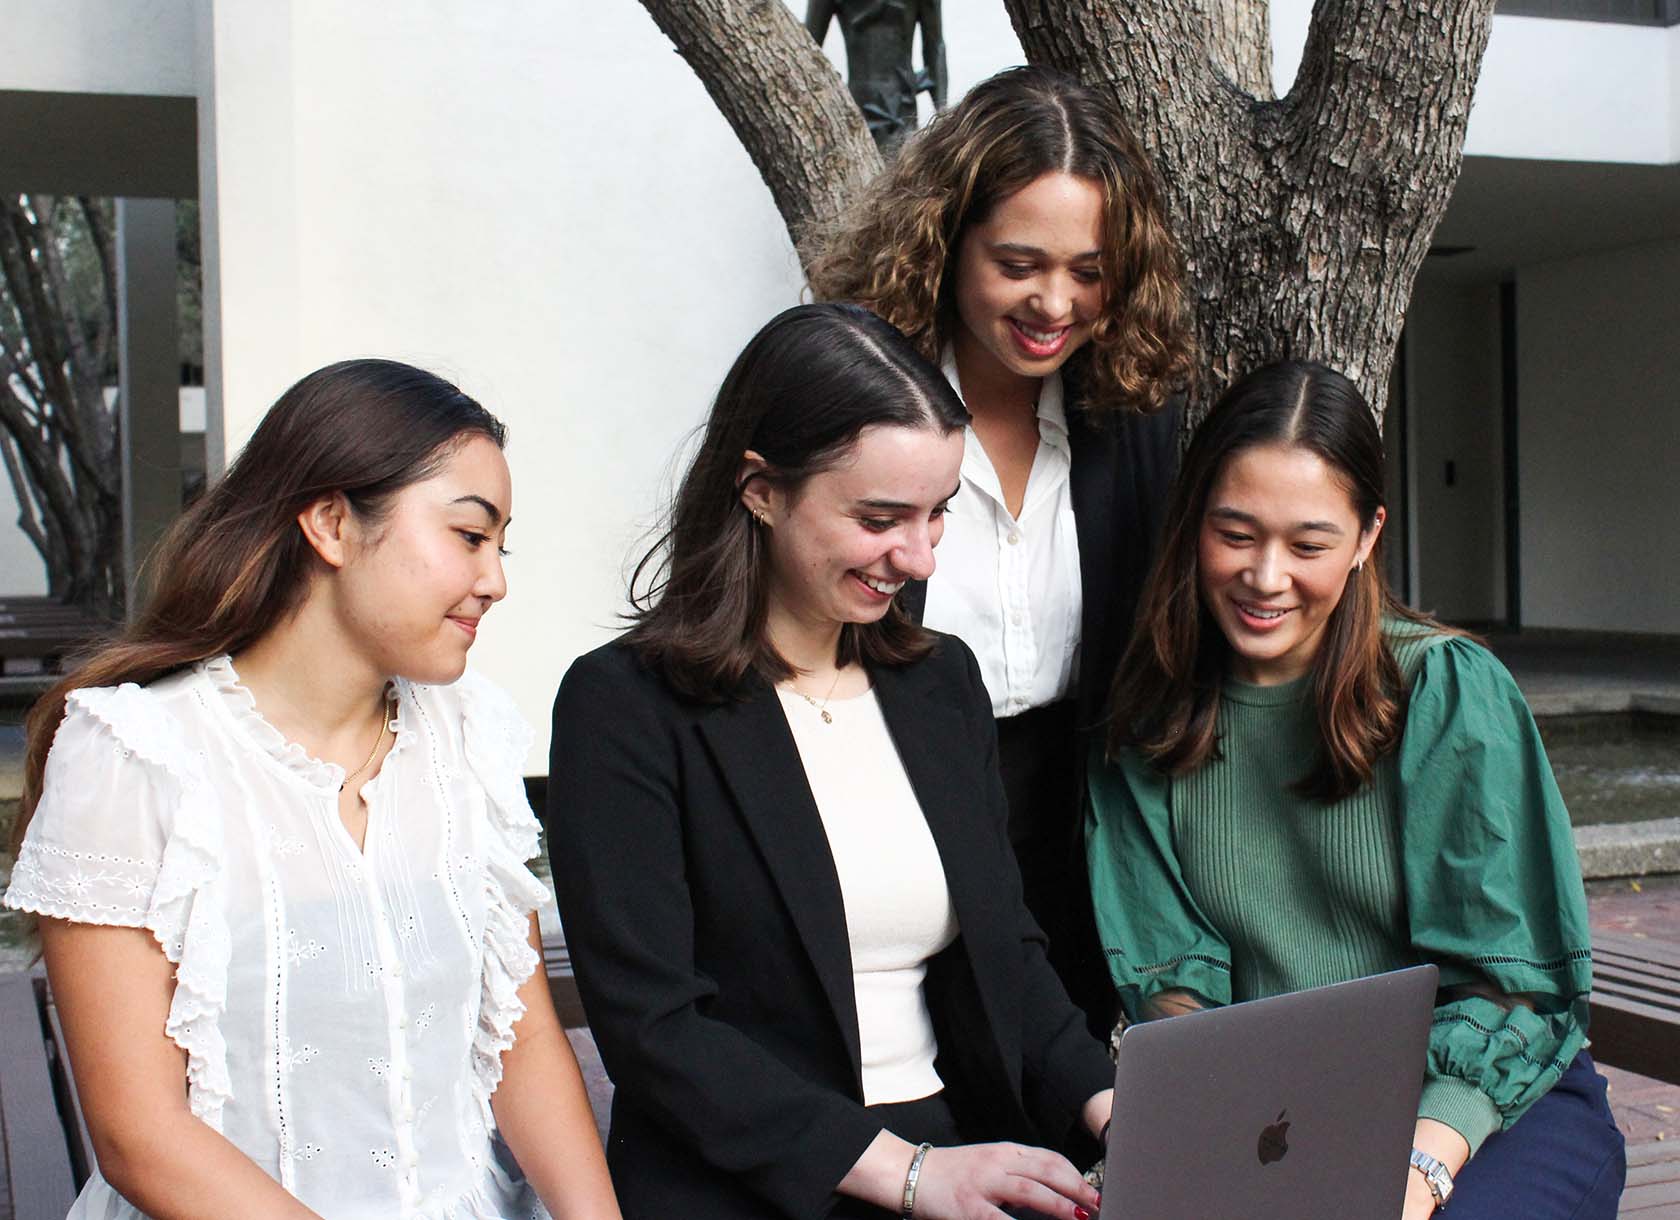 Four members of the Scripps Student Investment fund looking at a laptop together.